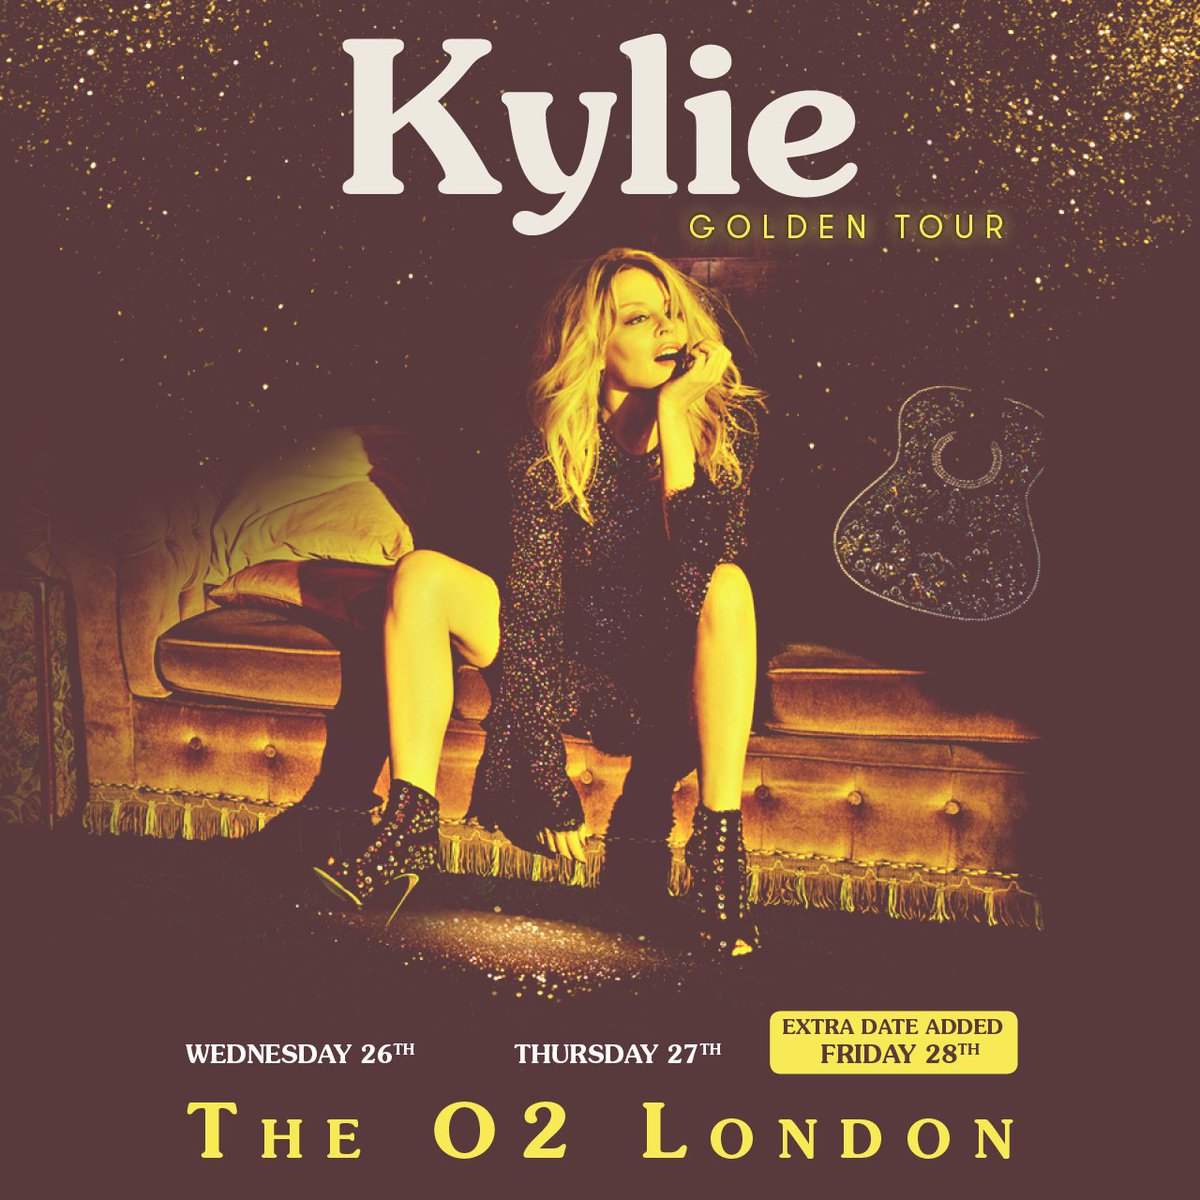 Tickets to my third show at @TheO2 are now on general sale! See you there ✨ https://t.co/sjxMGZN5pH https://t.co/74UPfoyVws